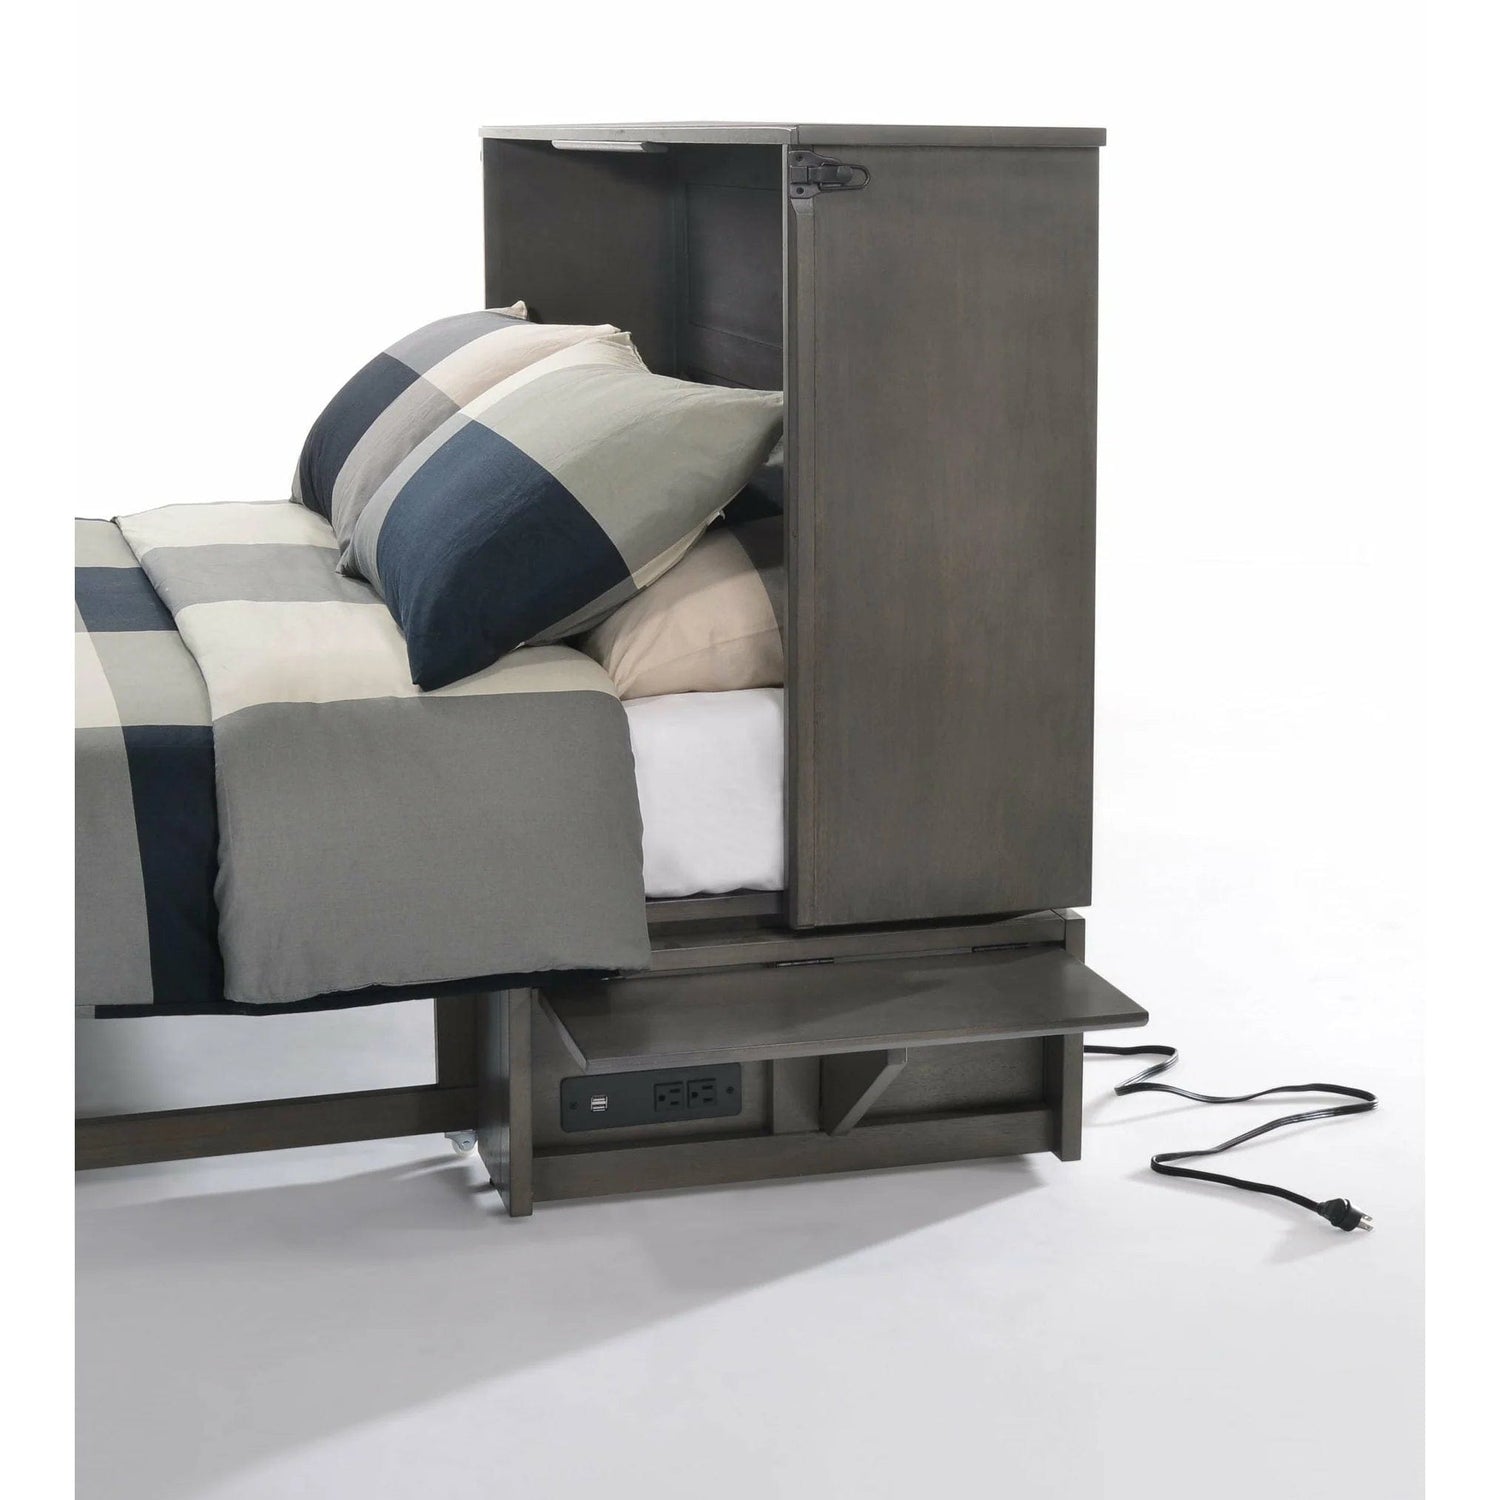 Night and Day Furniture Sagebrush Queen Murphy Cabinet Bed in in Stonewash Finish with Mattress